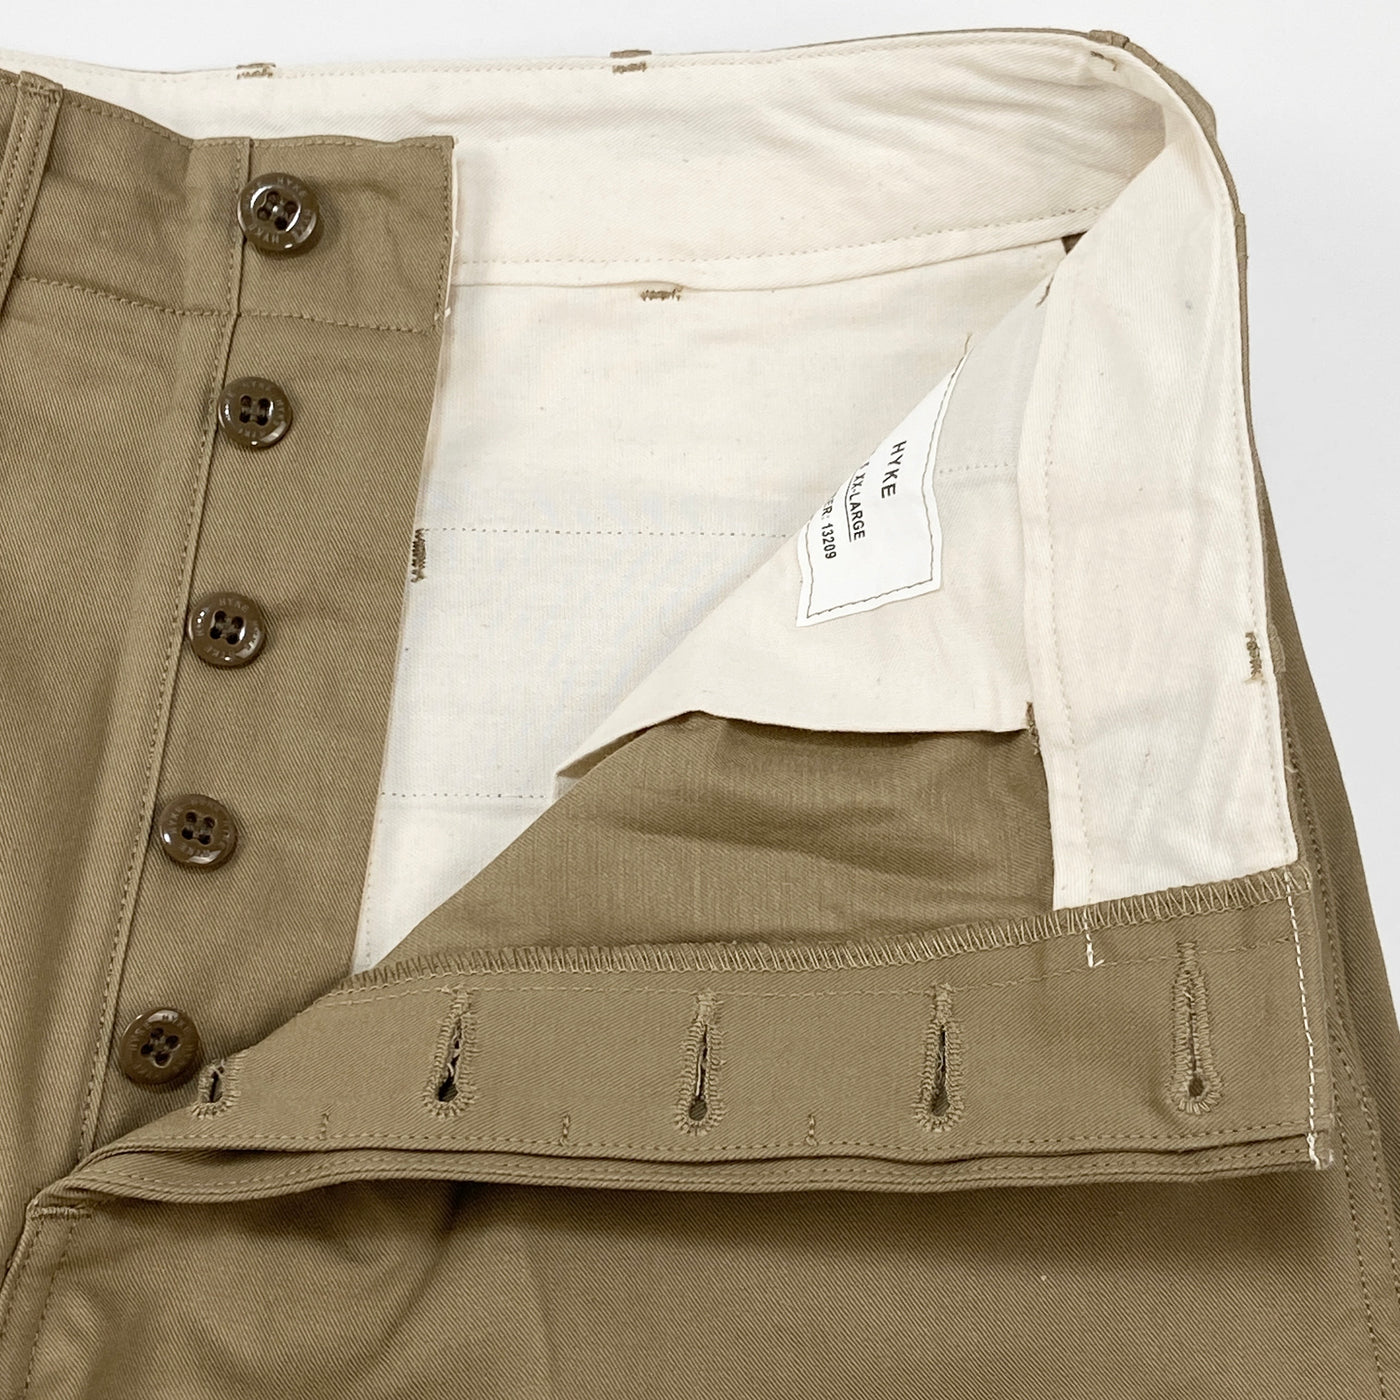 2022SS COTTON TWILL ARMY CHINOS 221-13209 5 XX-LARGE